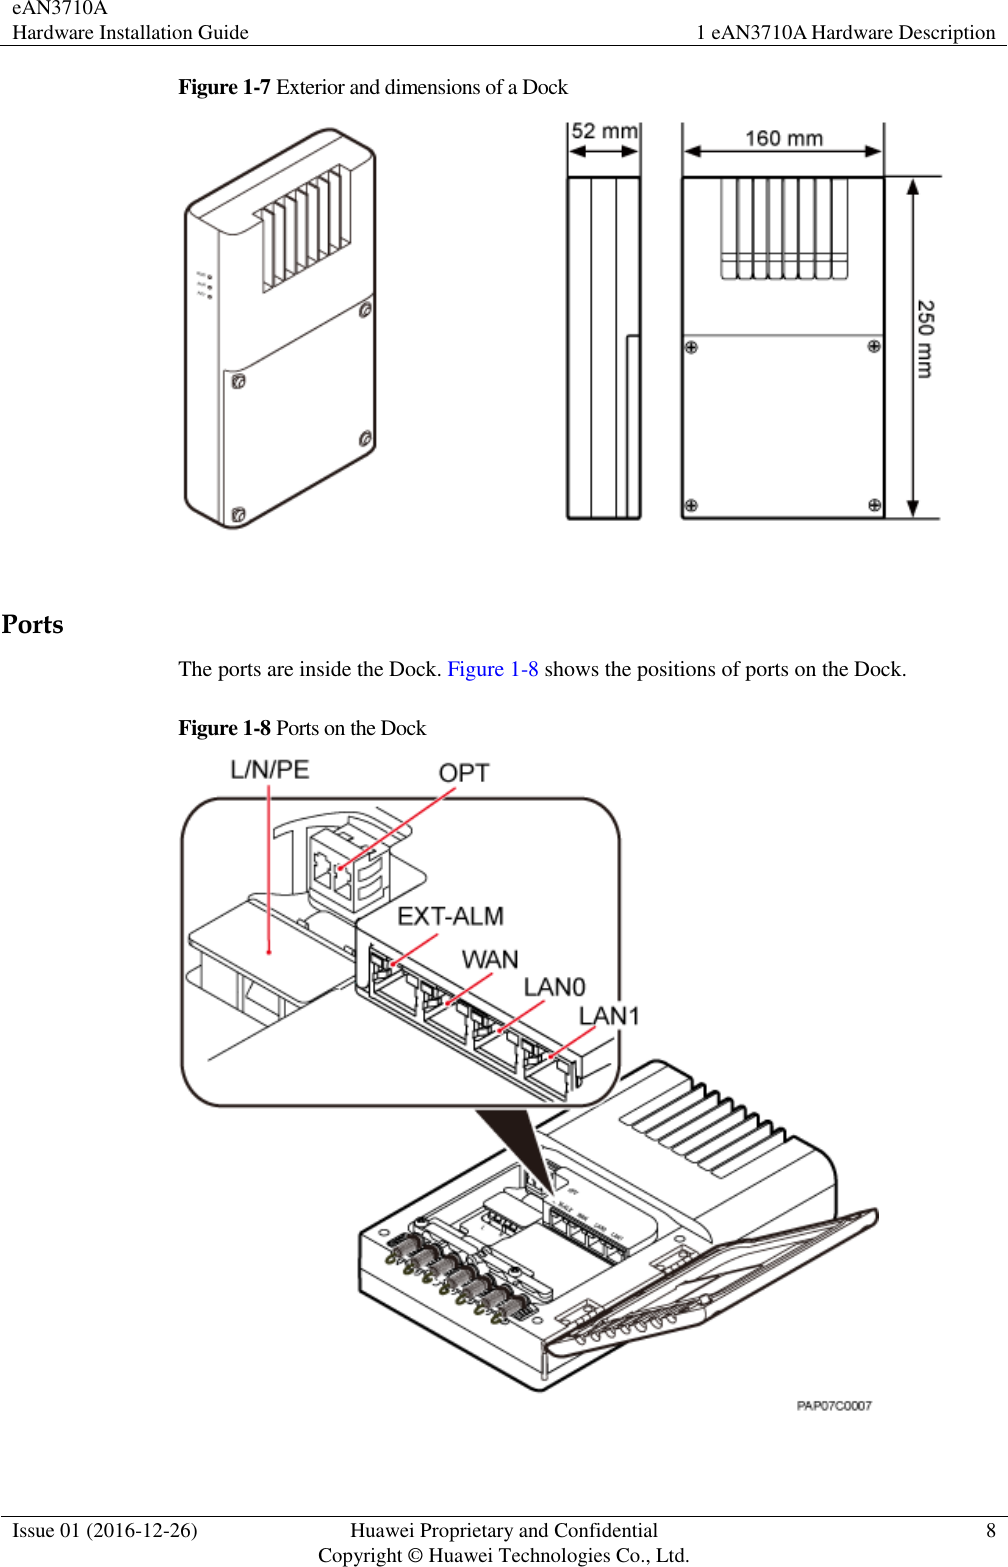 eAN3710A Hardware Installation Guide 1 eAN3710A Hardware Description  Issue 01 (2016-12-26) Huawei Proprietary and Confidential                                     Copyright © Huawei Technologies Co., Ltd. 8  Figure 1-7 Exterior and dimensions of a Dock   Ports The ports are inside the Dock. Figure 1-8 shows the positions of ports on the Dock. Figure 1-8 Ports on the Dock   